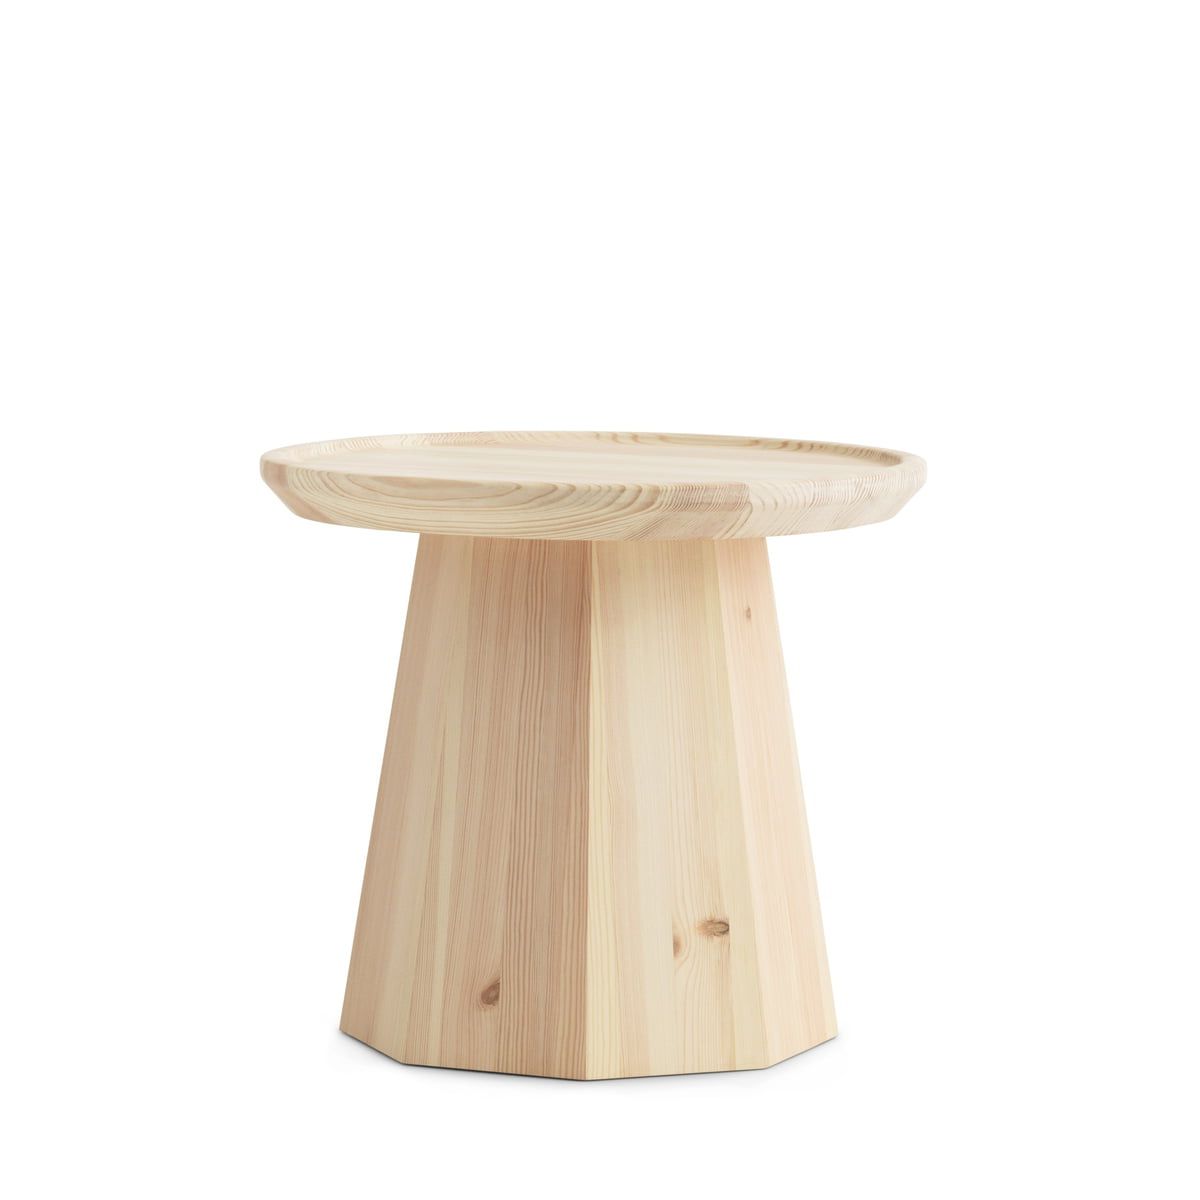 Natural Pine Coffee Tables Intended For Most Recently Released Pine Side Tablenormann Copenhagen (View 11 of 20)